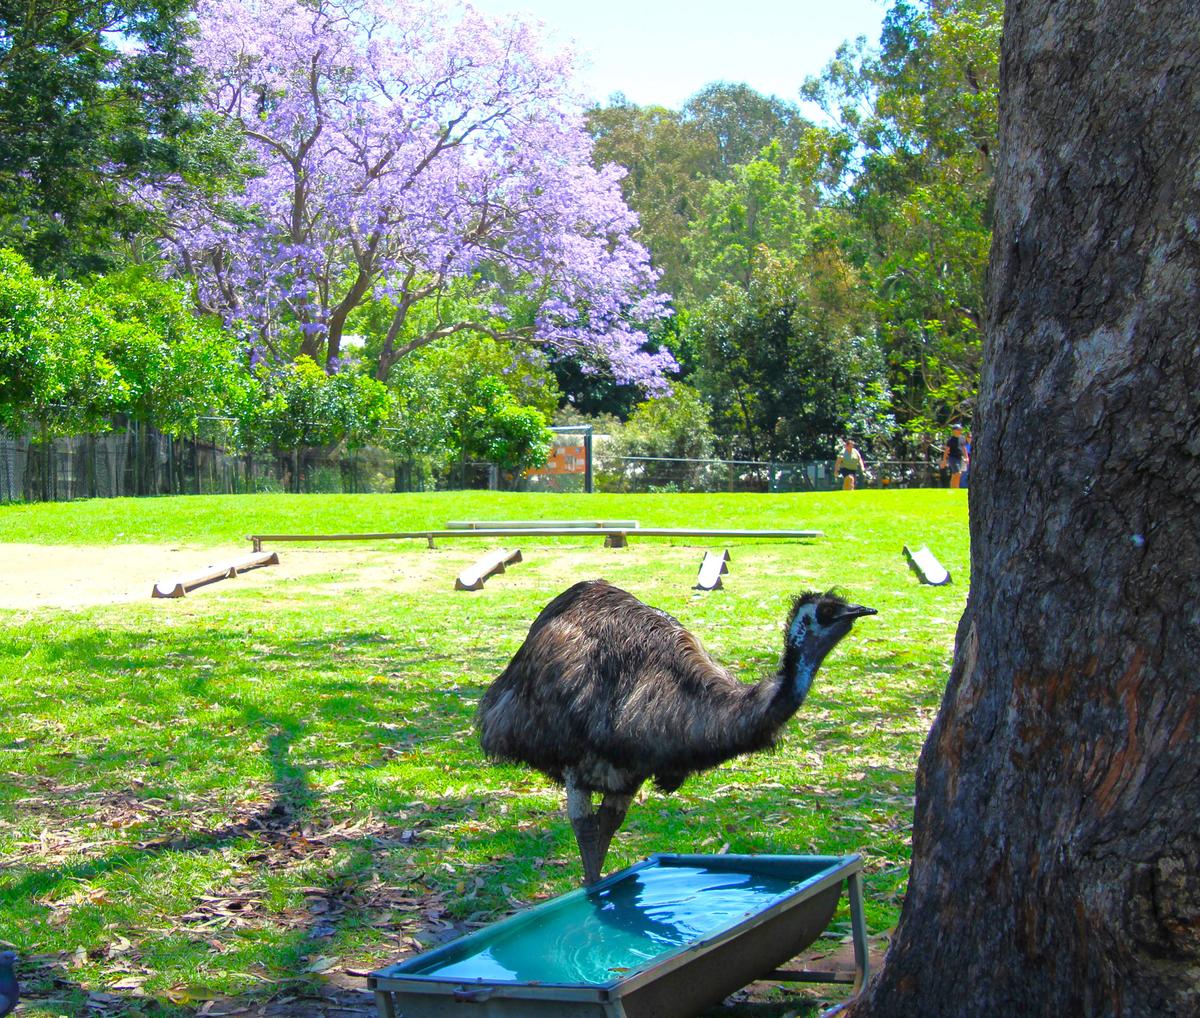 At Lone Pine Koala Sanctuary in Fig Tree Pocket just outside of Brisbane, an emu sips water near the shade of a jacaranda tree. The skies of the Brisbane area in an Australian spring are filled with pillowy clouds of sweetly-scented jacaranda blossoms. (Mary Ann Anderson/TNS)